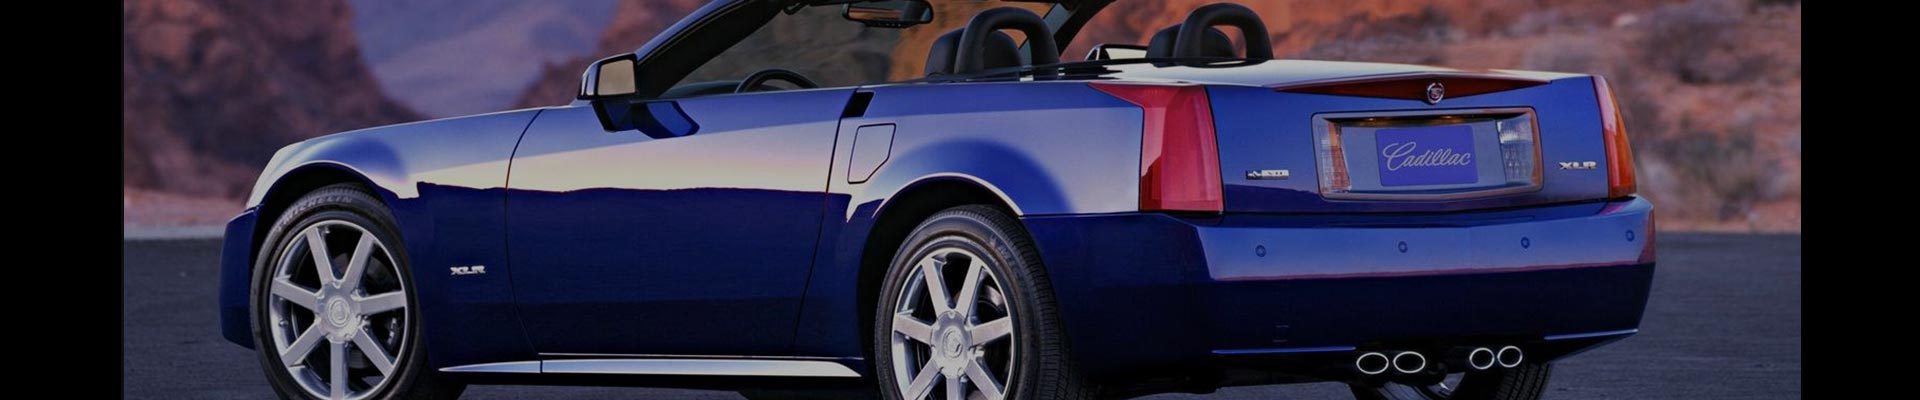 Shop Replacement and OEM 2007 Cadillac XLR Parts with Discounted Price on the Net